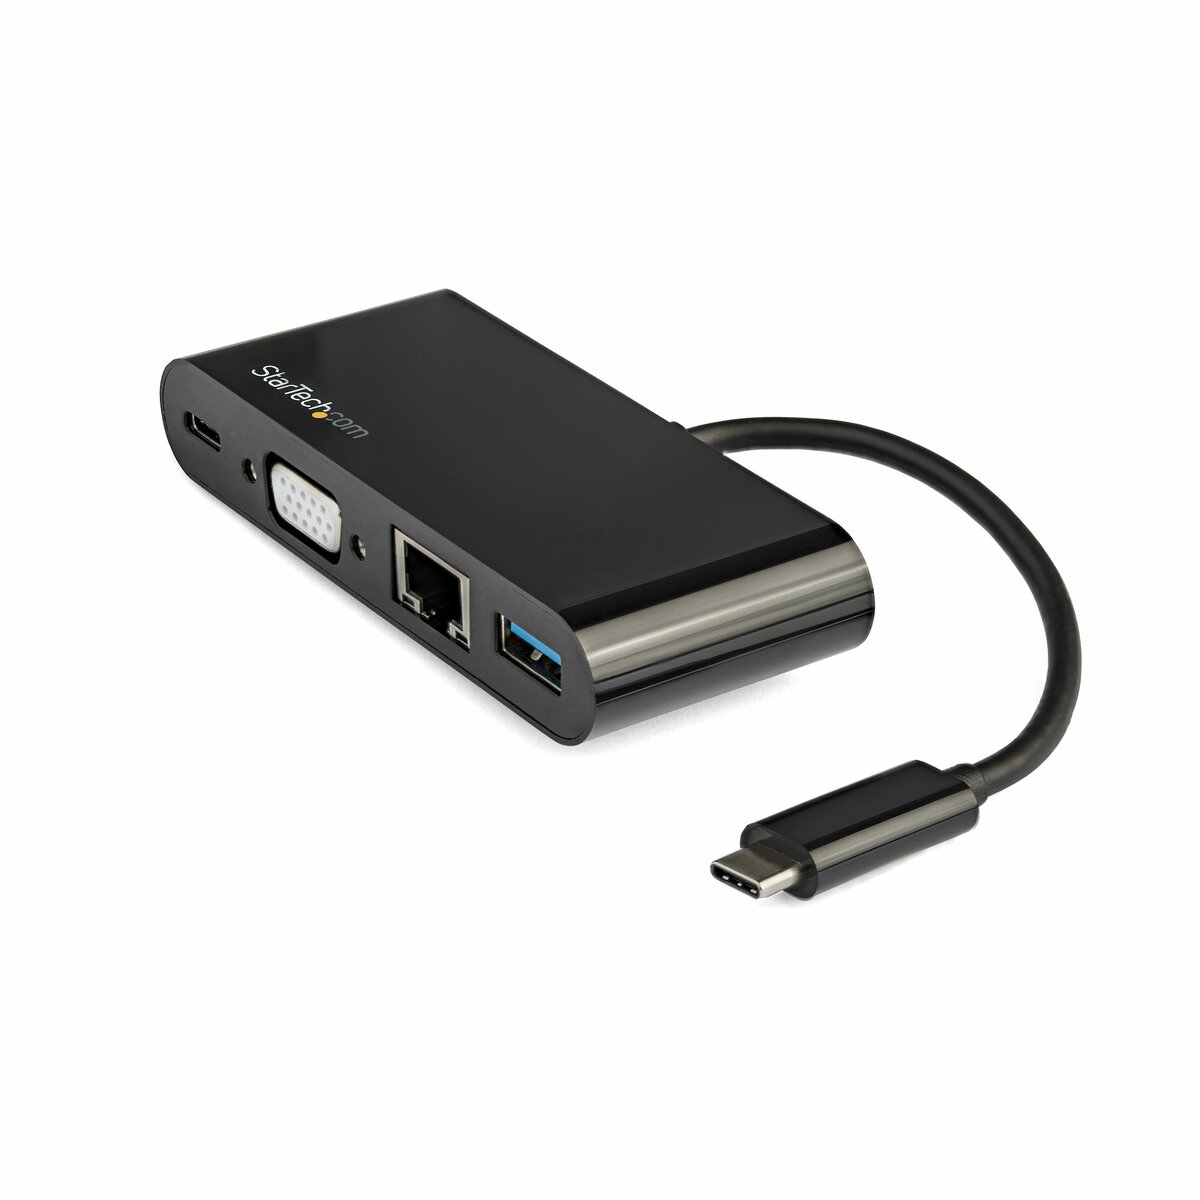 USB C Multiport Adapter HDMI/mDP 4K 60Hz - USB-C Multiport Adapters, Universal Laptop Docking Stations